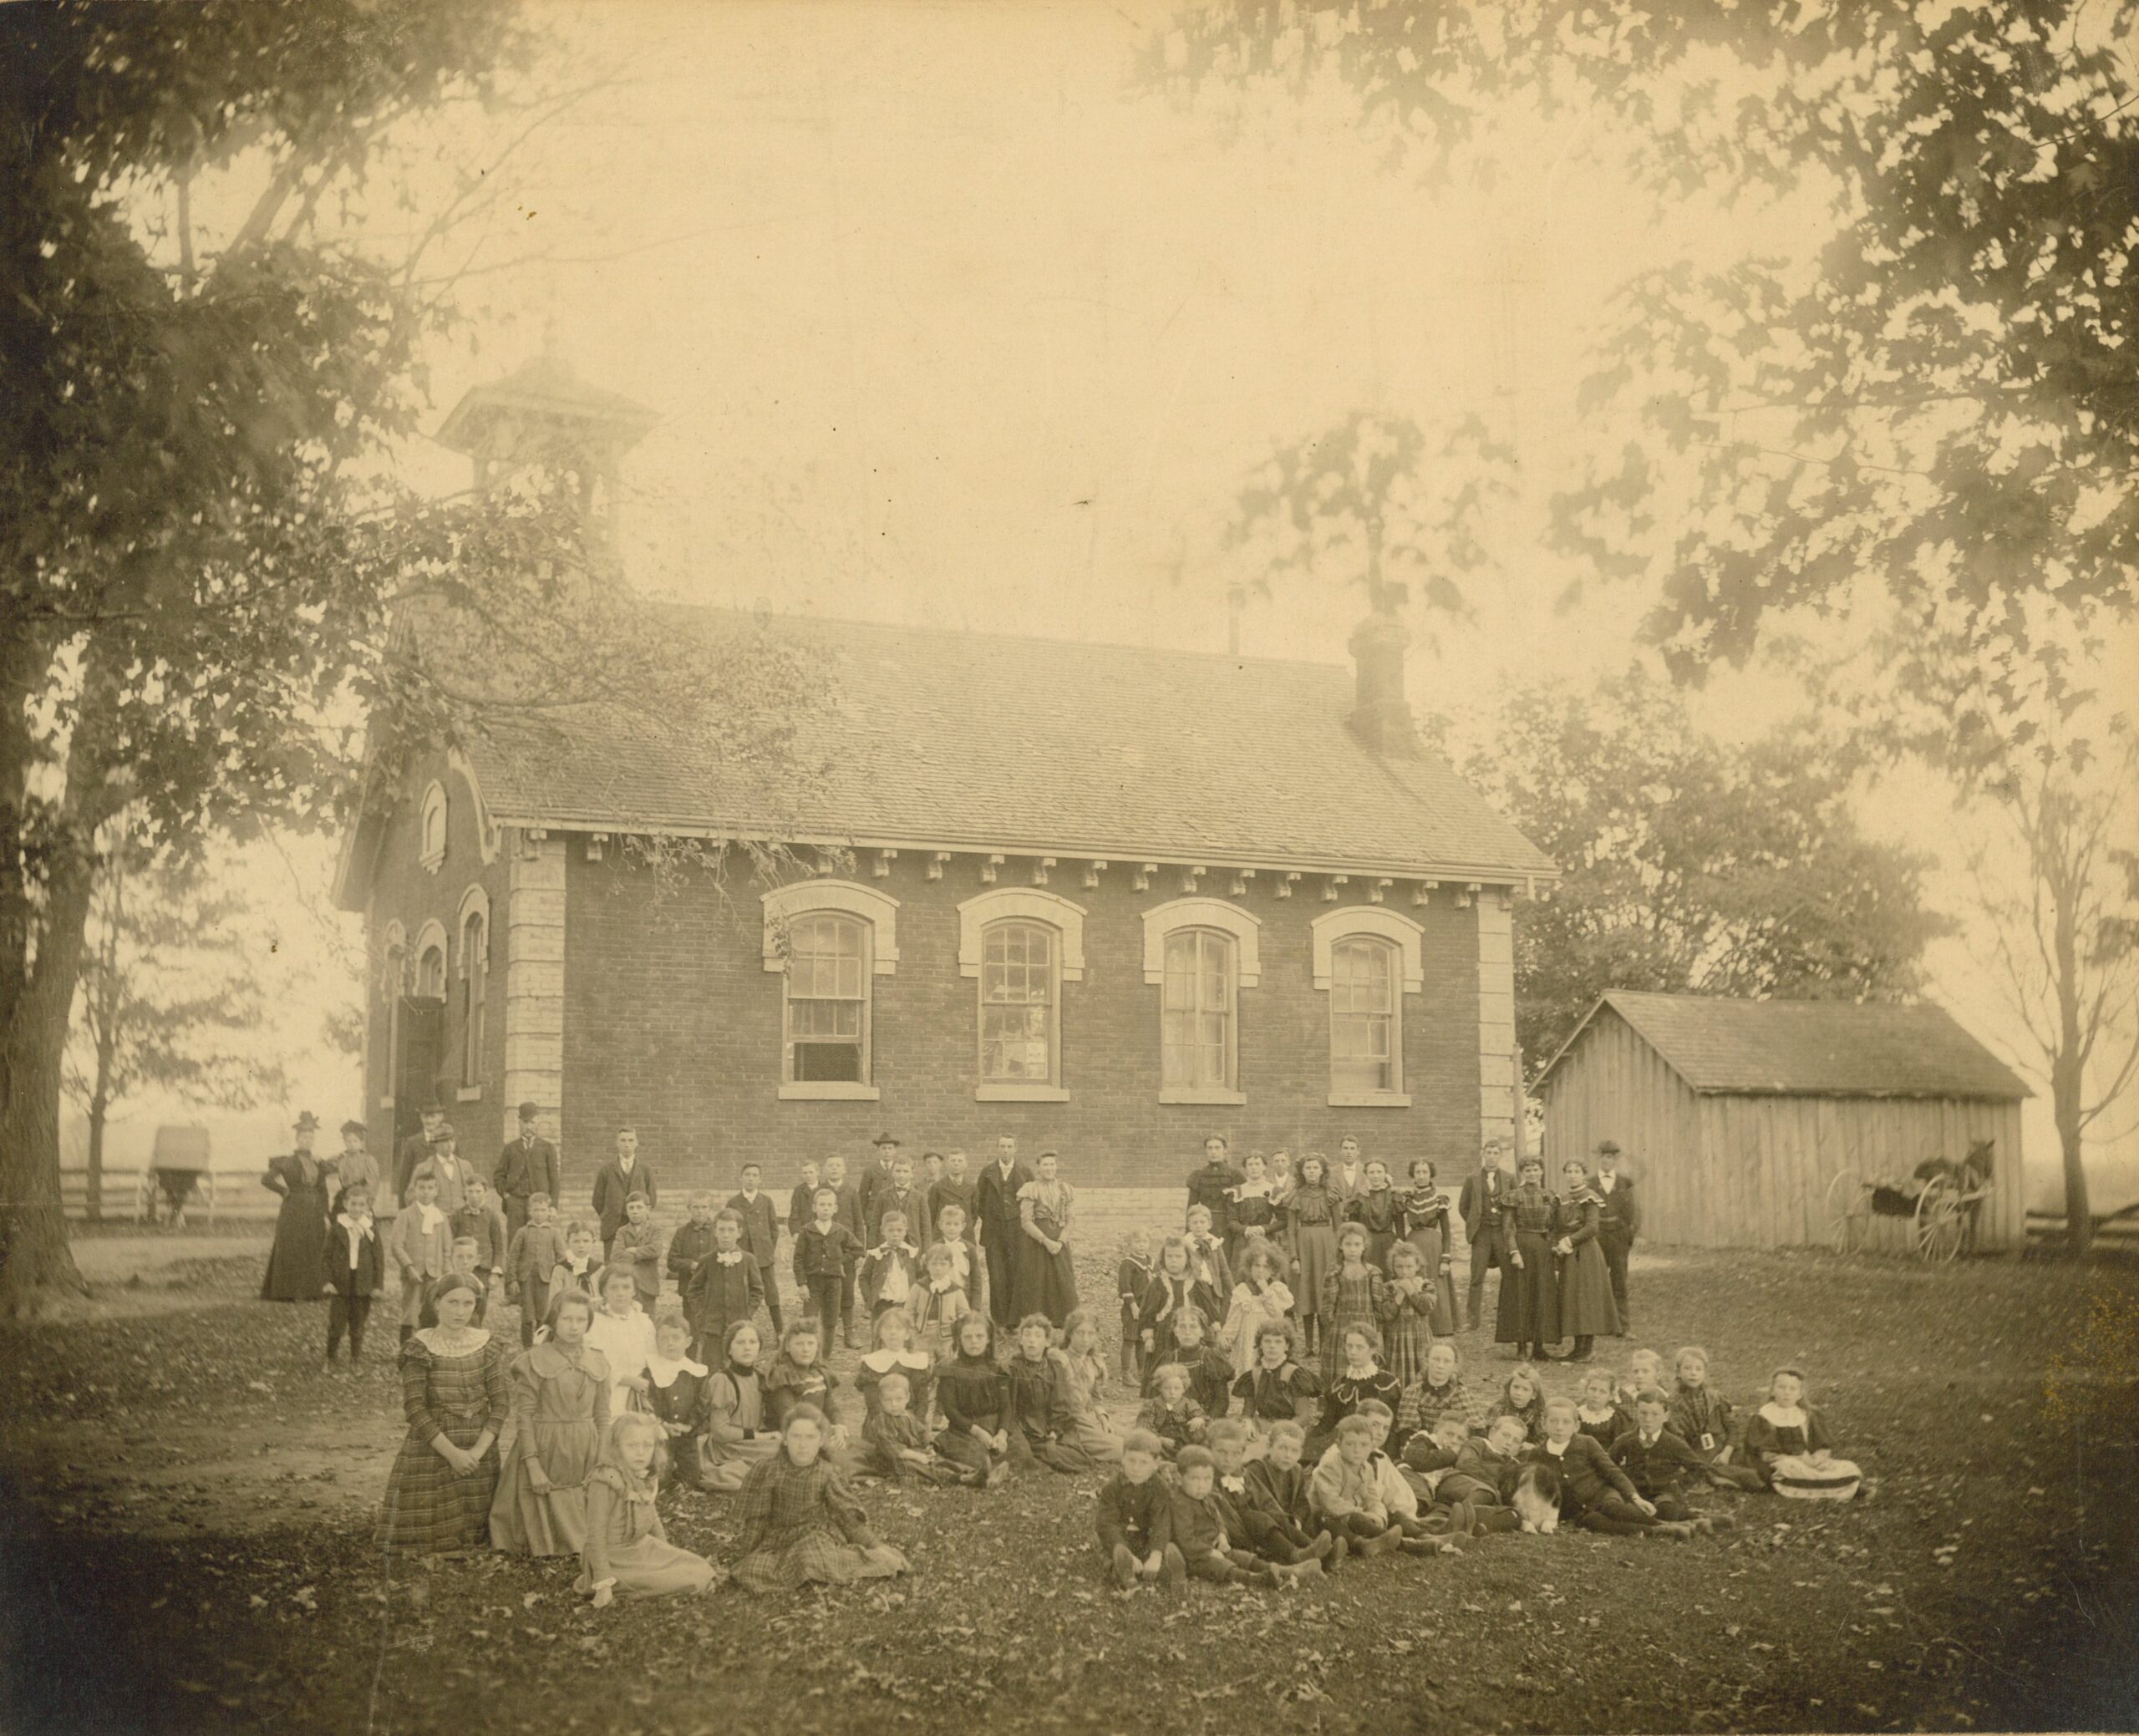 Sepia photograph of a group of people posed for the picture. They are in front of a brick building, and there are trees to the left and right of the image.